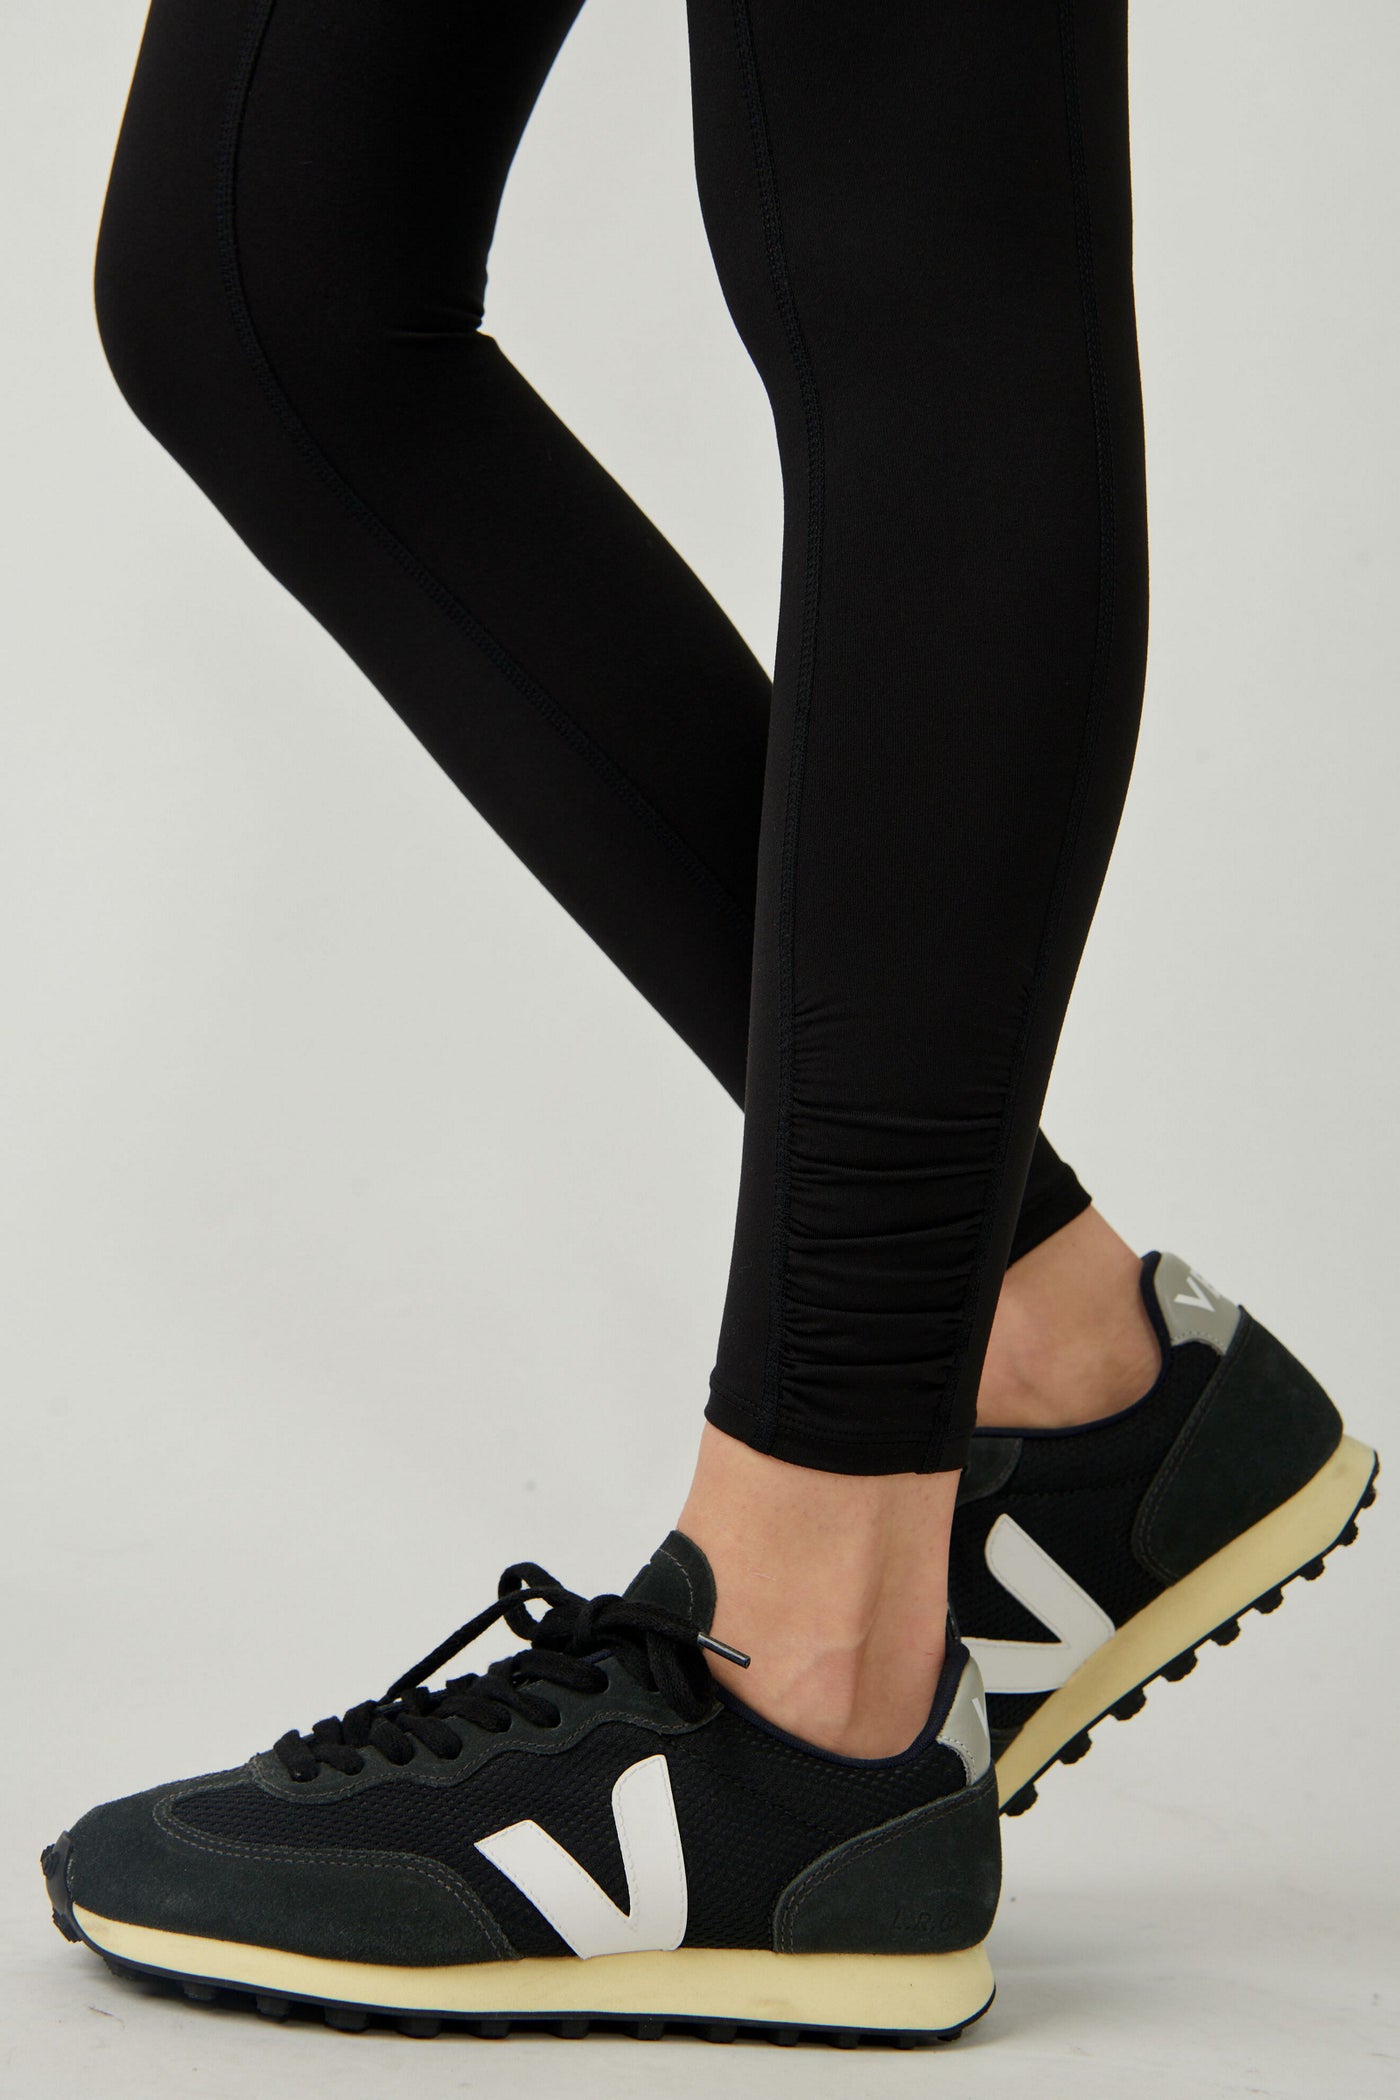 Free People Out of Your League Legging - Black